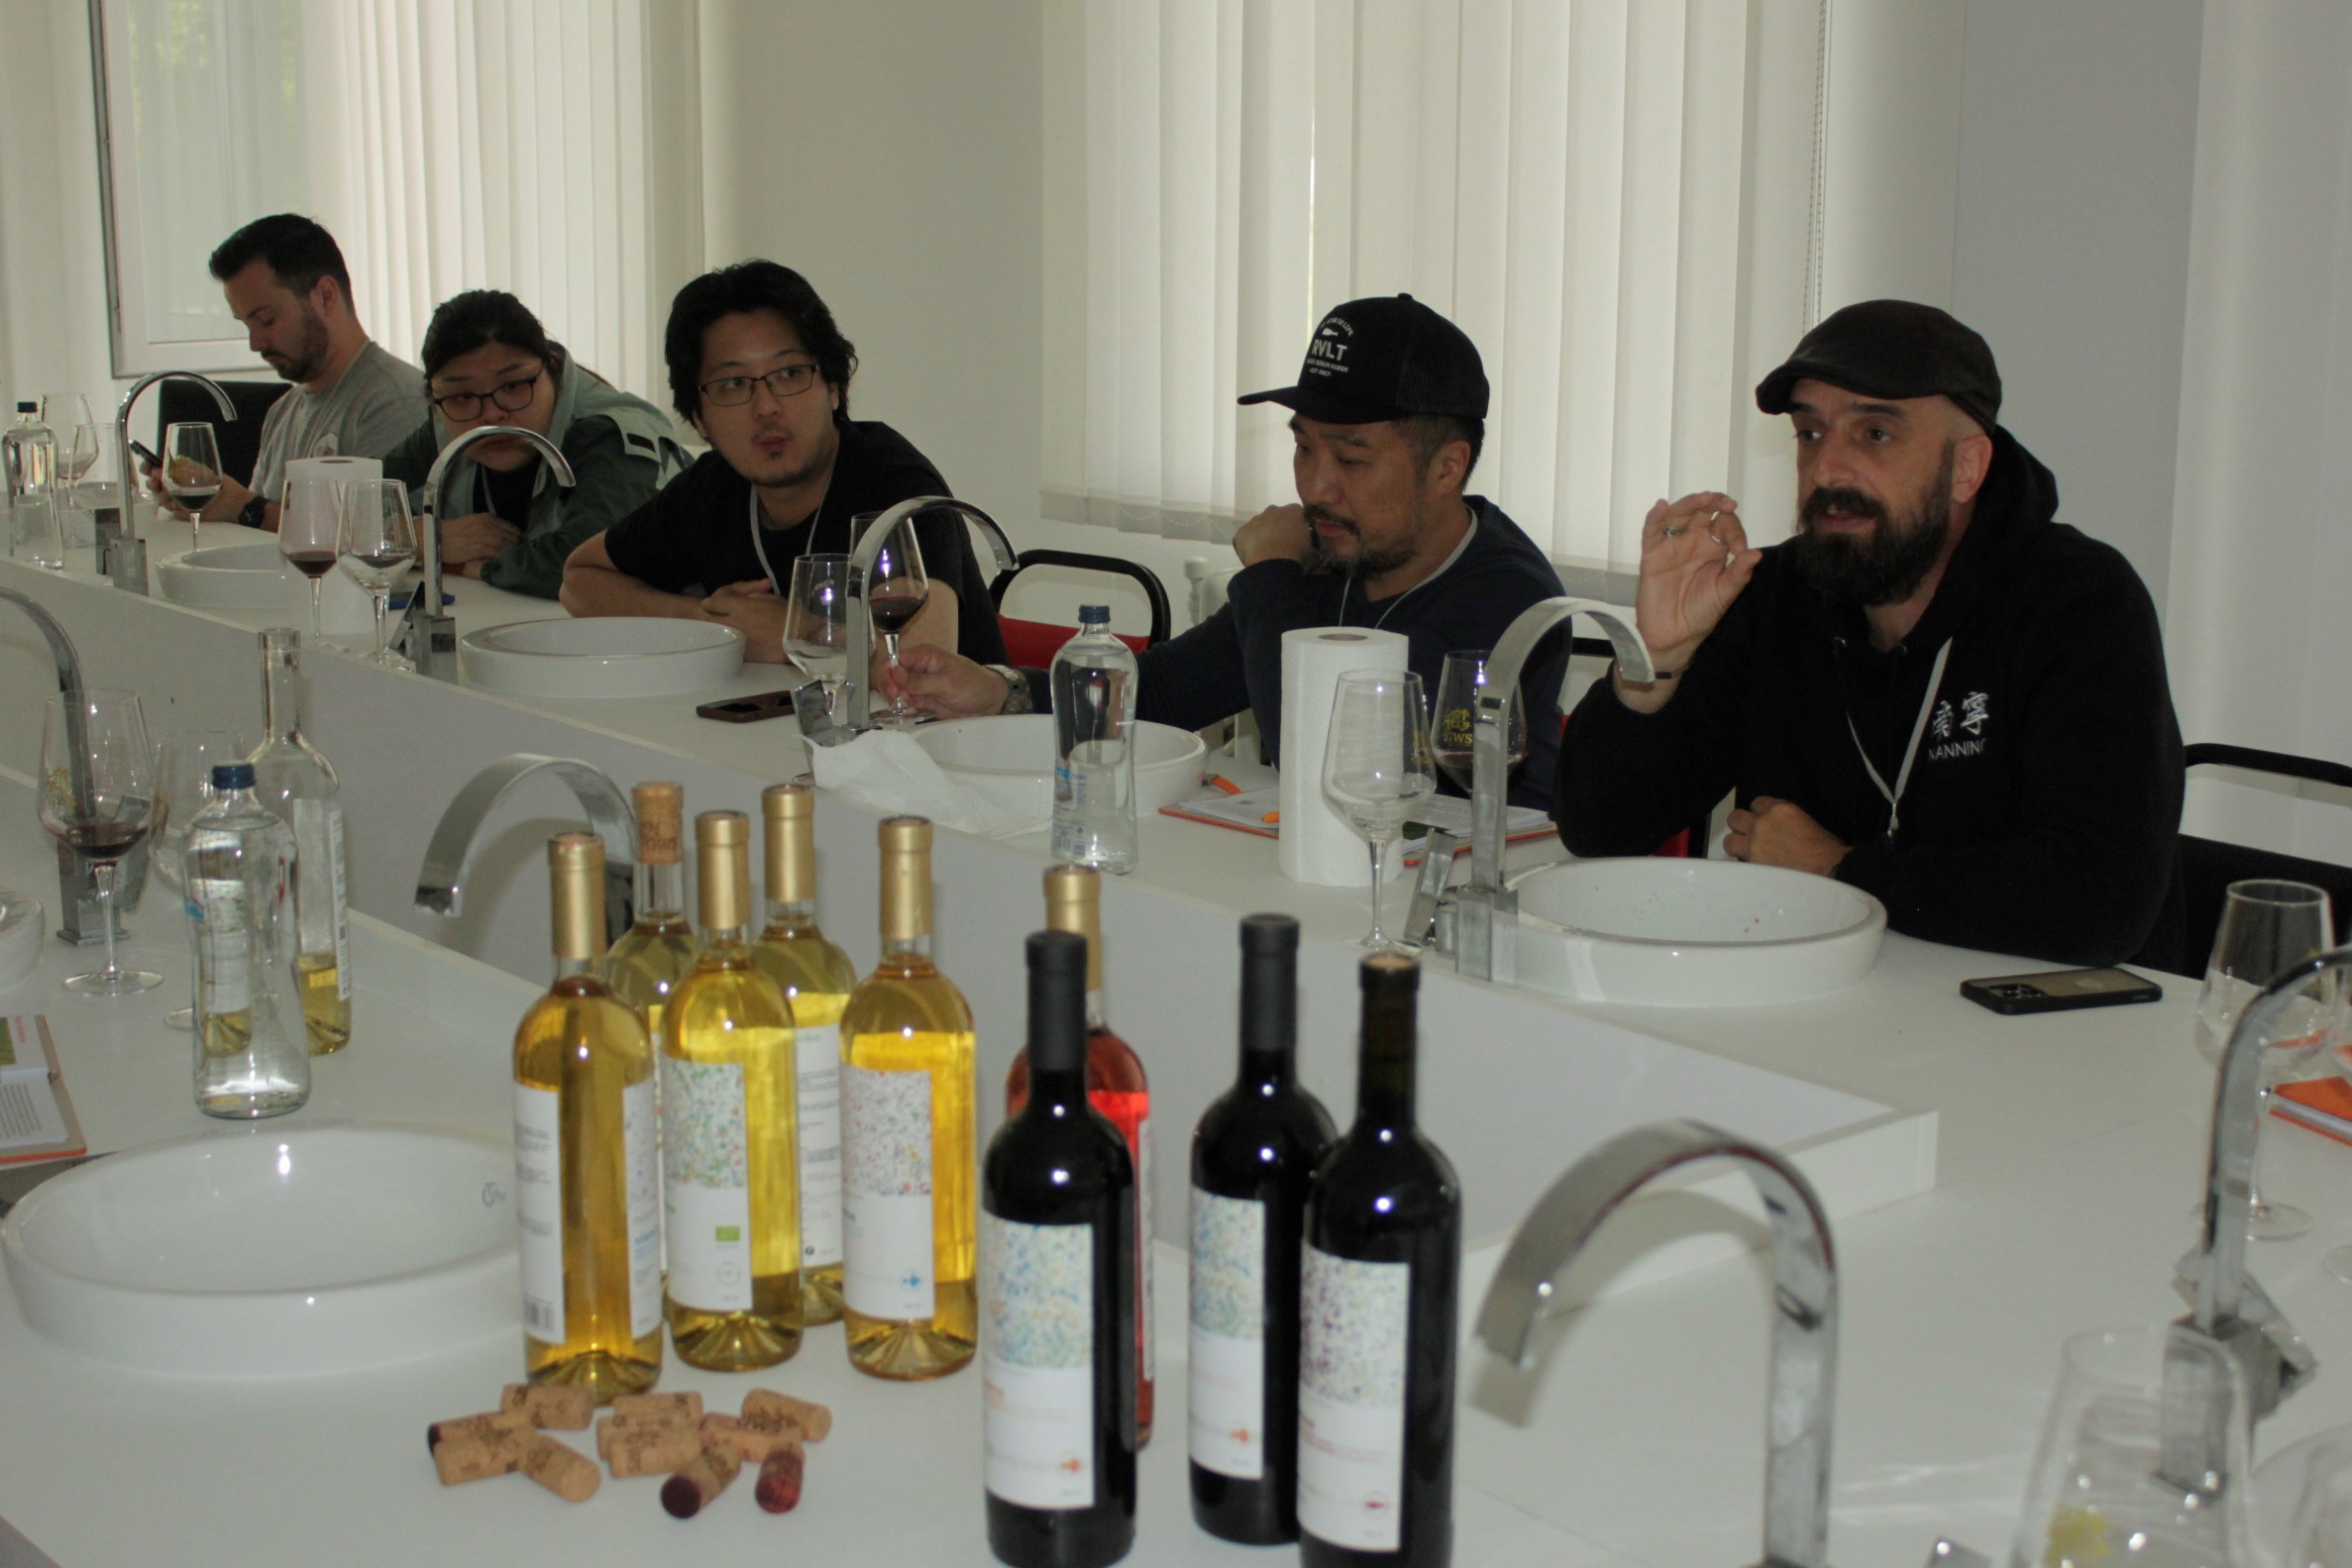 With the support of the National Wine Agency, wine professionals from Asian countries visited Georgia